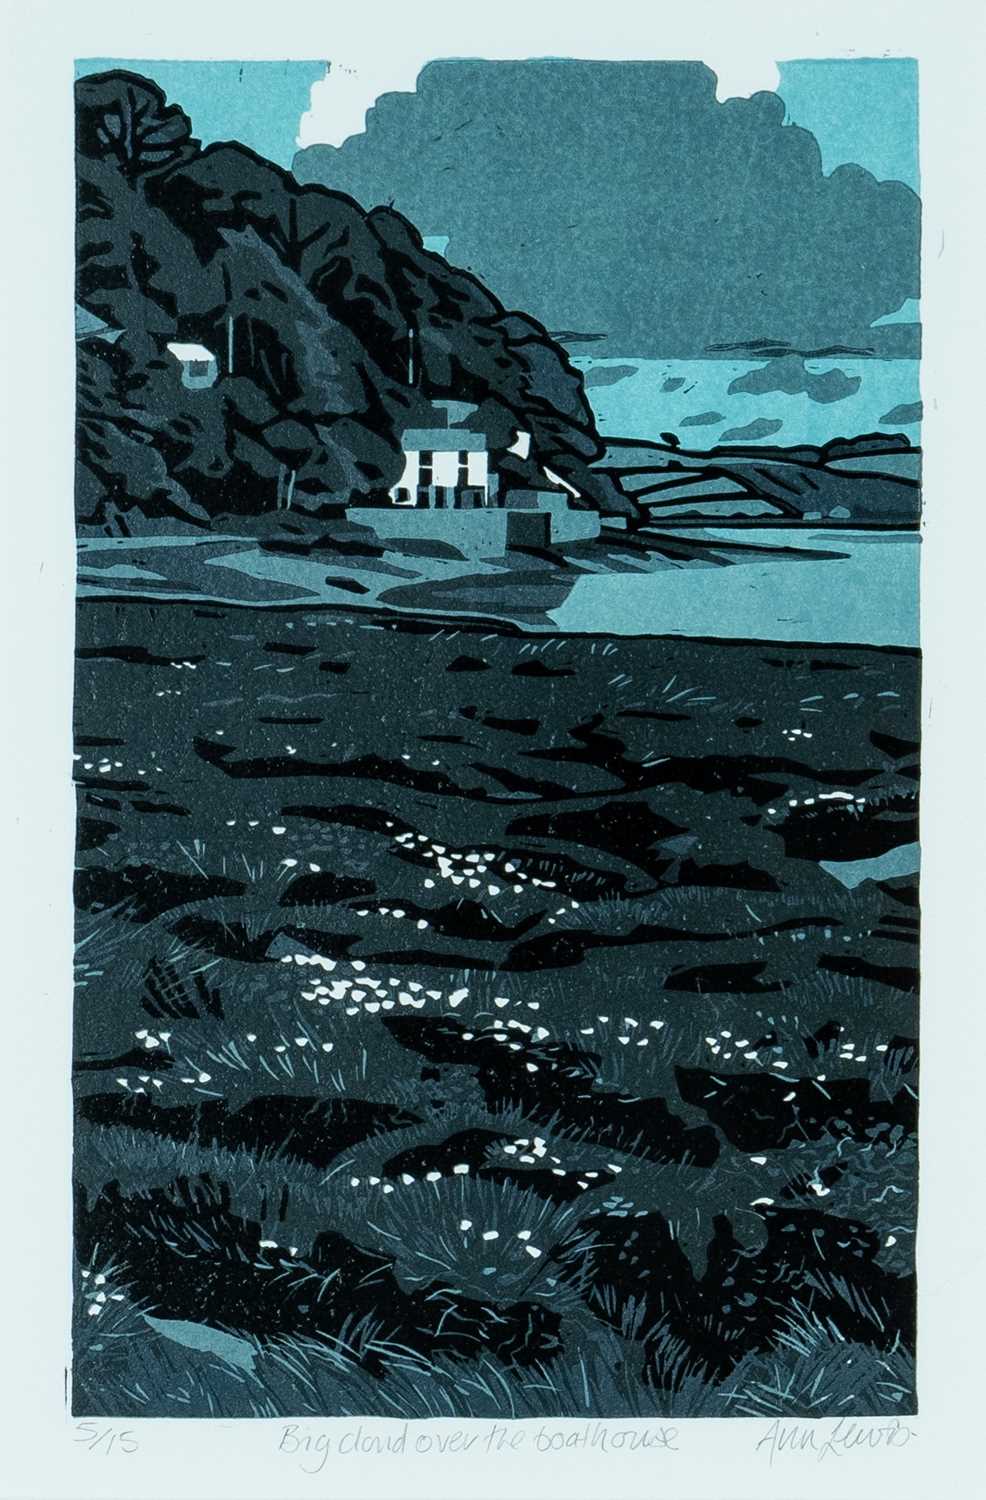 ‡ ANN LEWIS (Welsh b.1962) limited edition (5/15) linocut - entitled, 'Big Cloud Over the Boathouse'